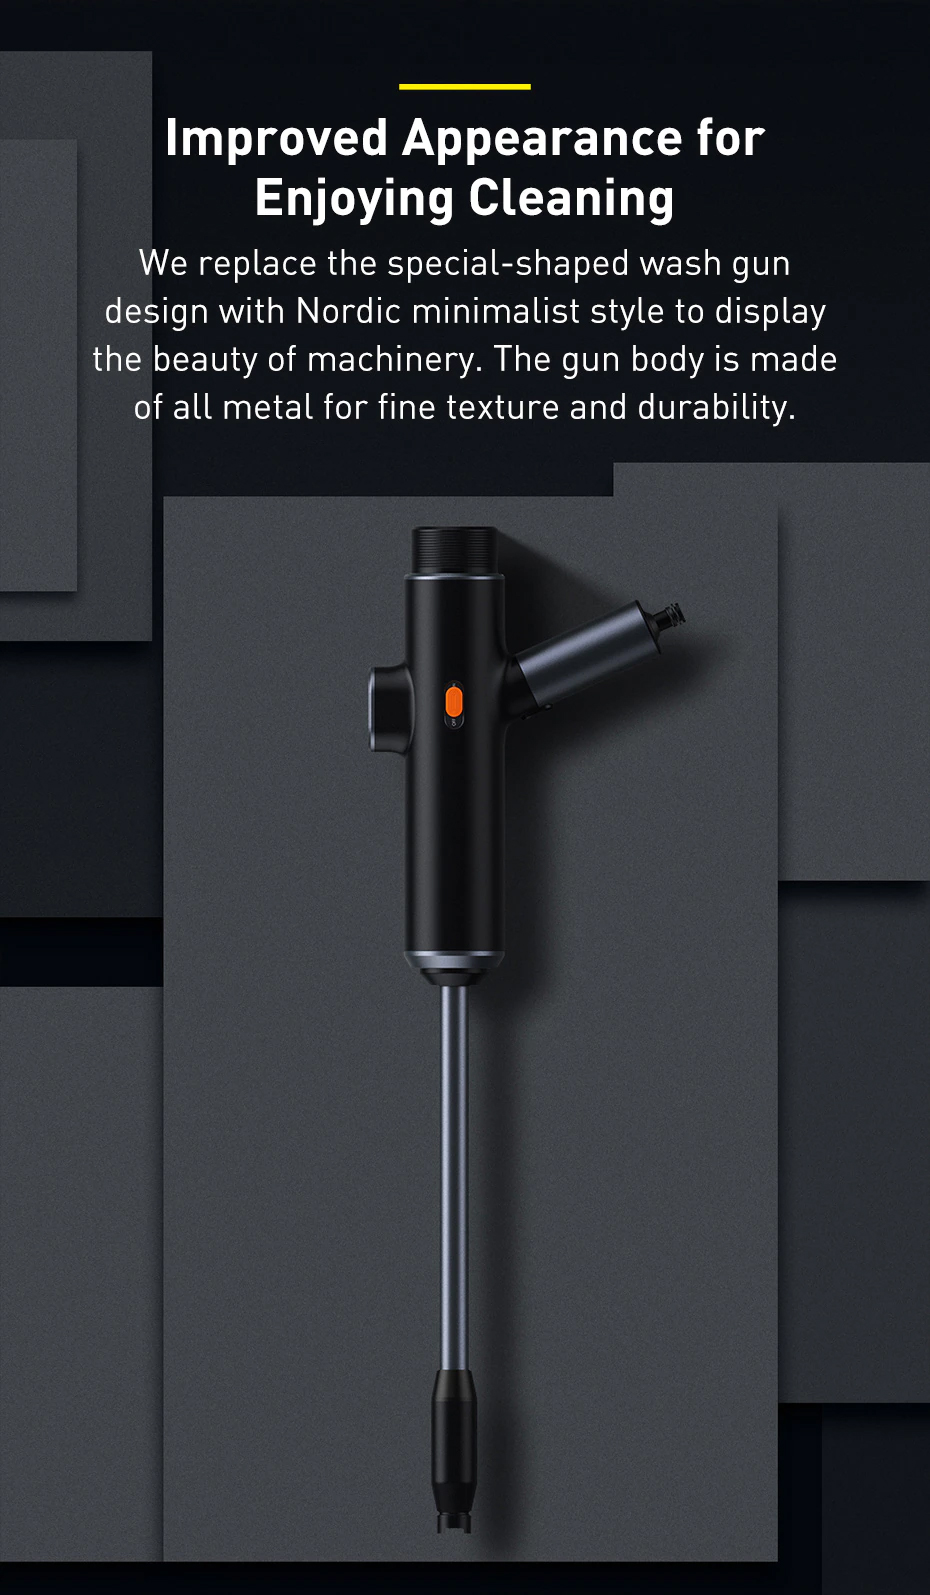 Improved Appearance for Enjoying Cleaning We replace the special-shaped wash gun design with Nordic minimalist style to display the beauty of machinery. The gun body is made of all metal for fine texture and durability.